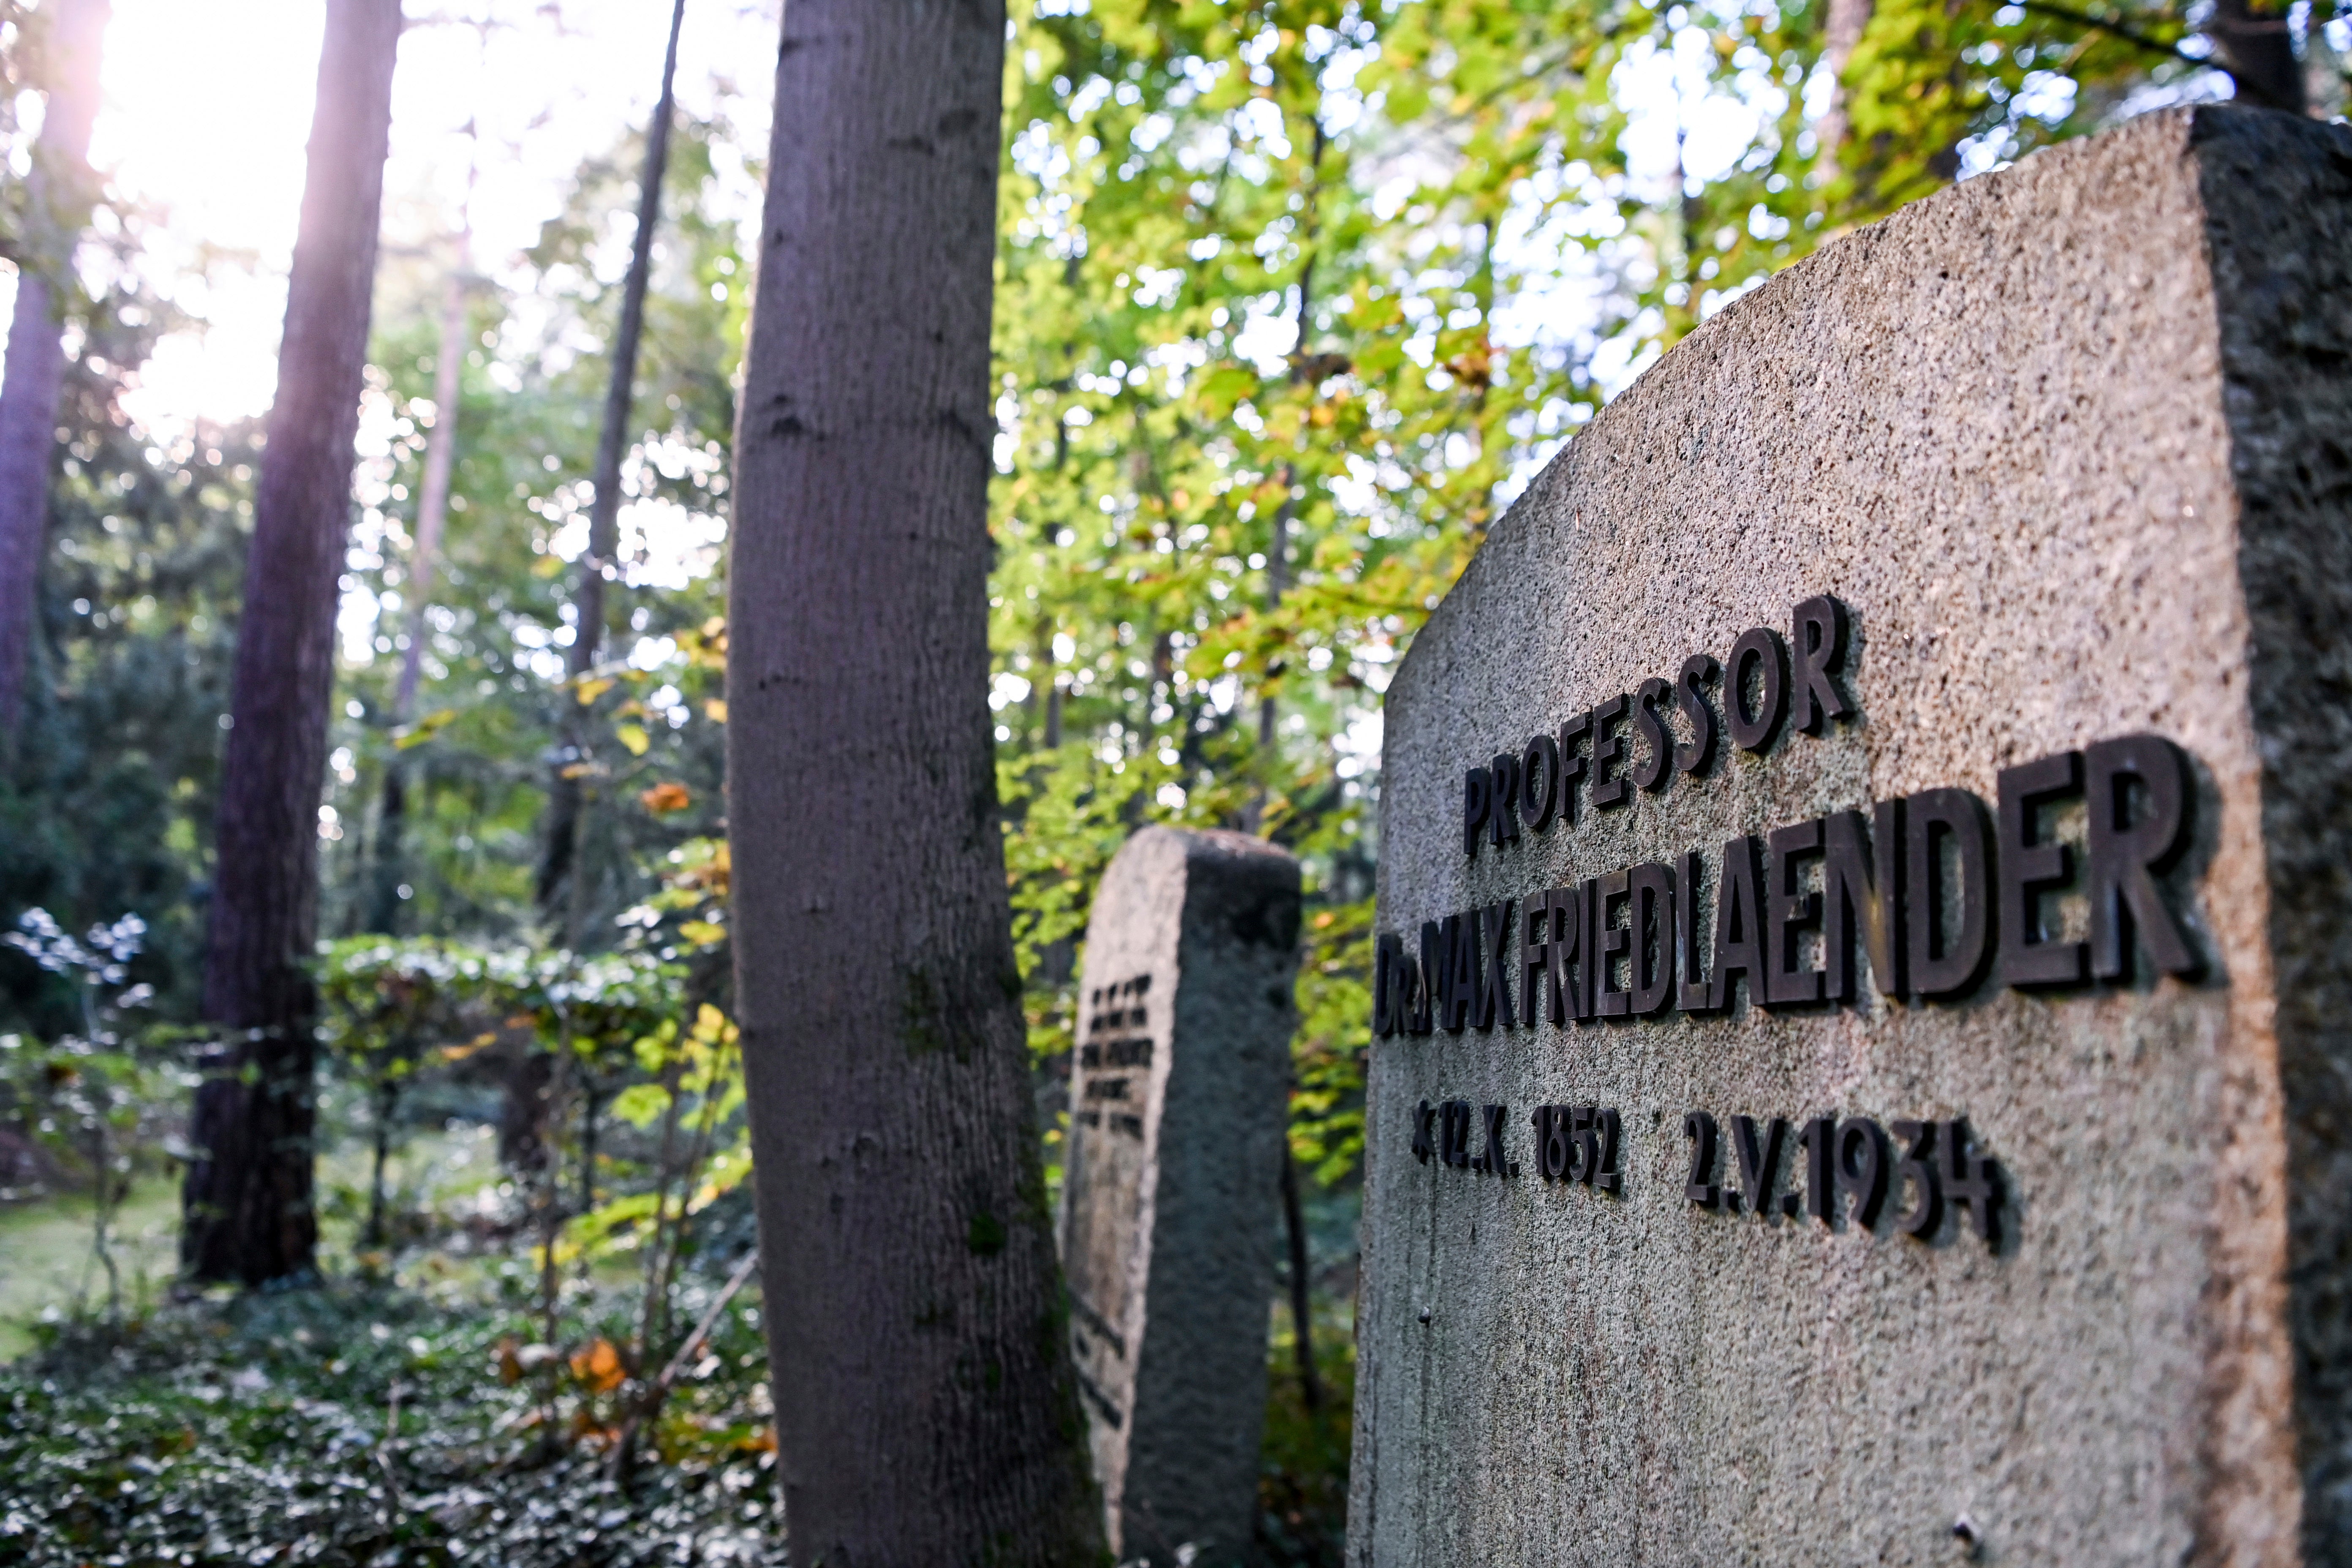 This 12 October 2021 taken photo shows the grave of Max Friedlaender, a musicologist of Jewish faith at the Suedwestkirchhof Stahnsdorf, Germany. The German government's top official against antisemitism on Wednesday criticized the burial of a Holocaust denier on the former gravesite of a known Jewish musicologist